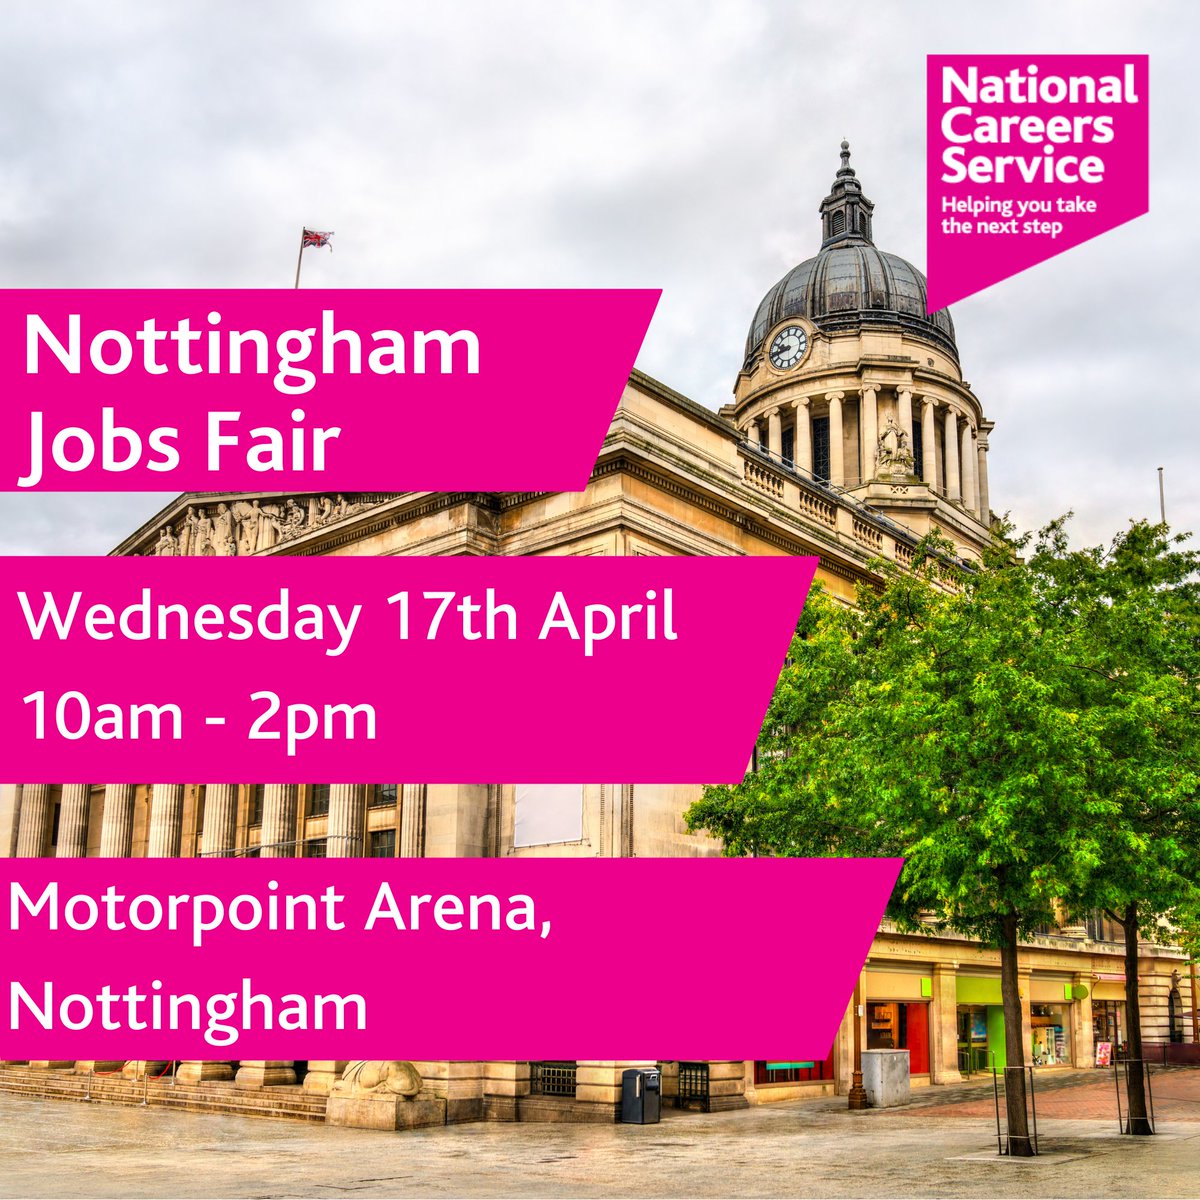 Only two days to go, #Nottingham! 🙌 We're getting excited for Wednesday's Jobs Fair at Motorpoint Arena, and we hope you are, too! It gives you a fantastic opportunity to learn more about how you can take the next step in your career journey - and we'll be right be your side.